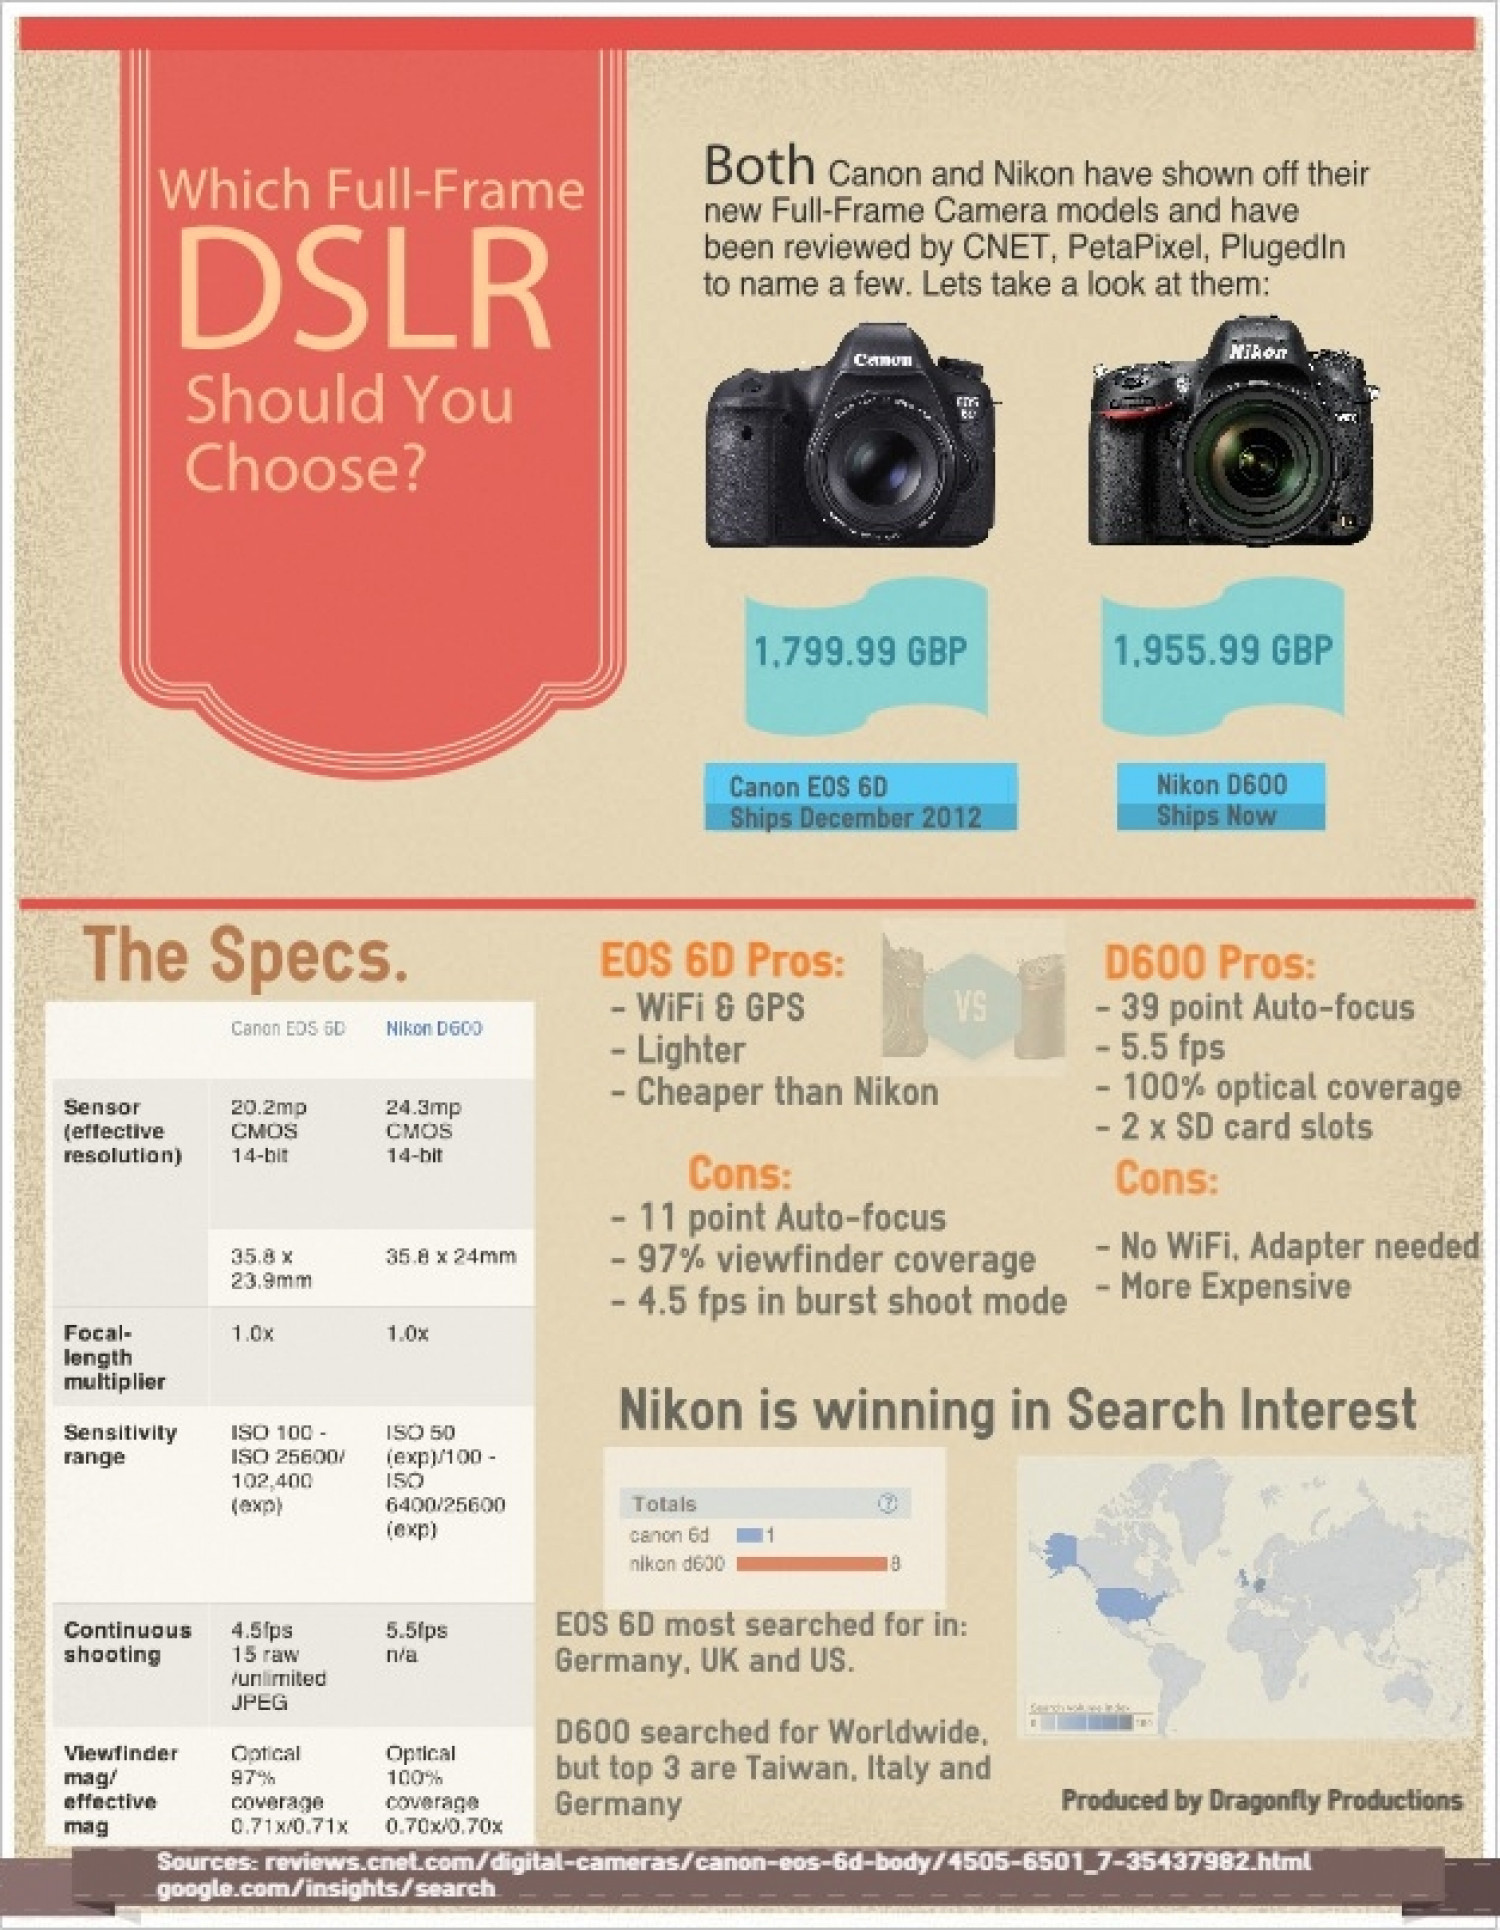 Which Full Frame DSLR Should You Choose Infographic